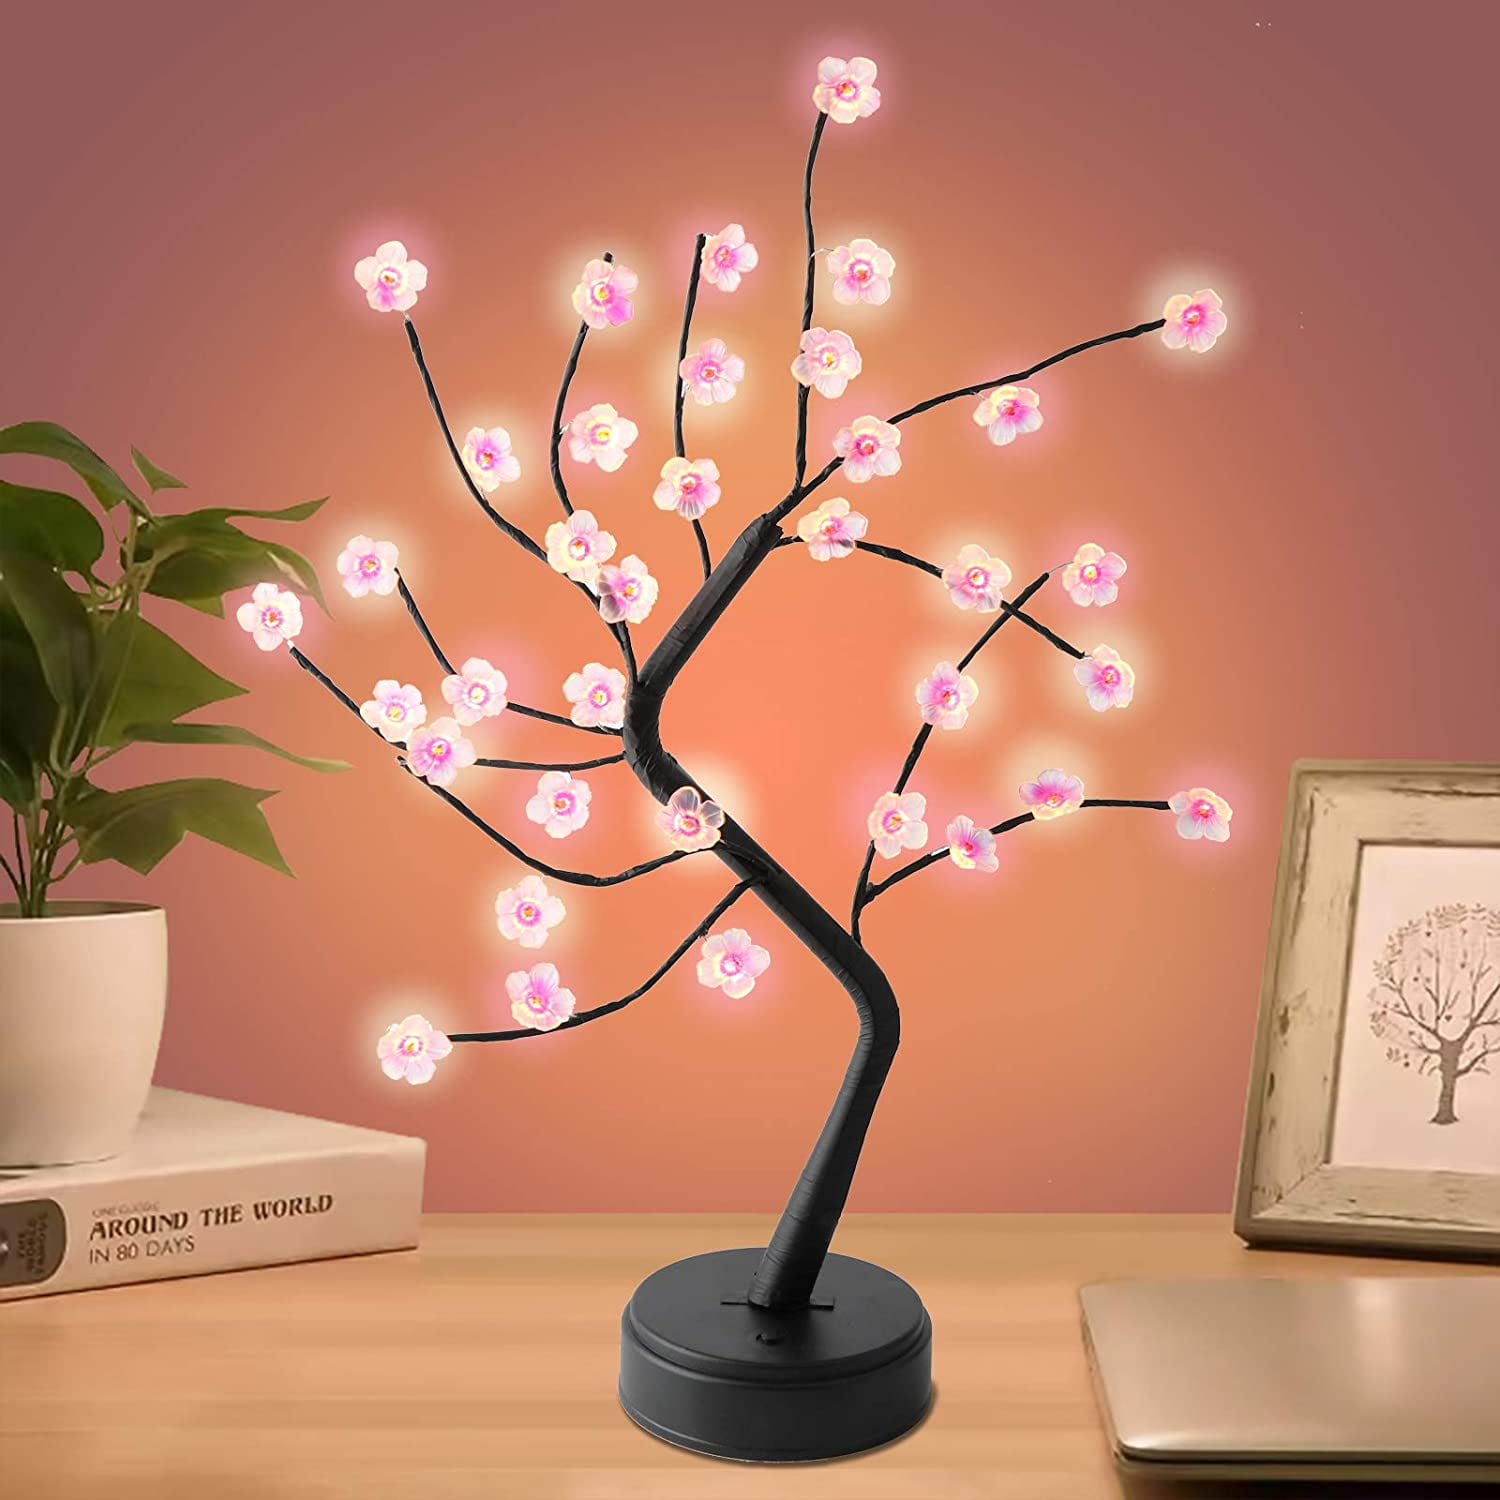  OTAVILEM Bonsai Tree Light, Tree Lamps for Living Room, Cute  Night Light for House Decor, Good for Gifts, Home Decorations, Weddings,  Christmas and More (Pink Cherry Blossom, 36 LED) : Grocery